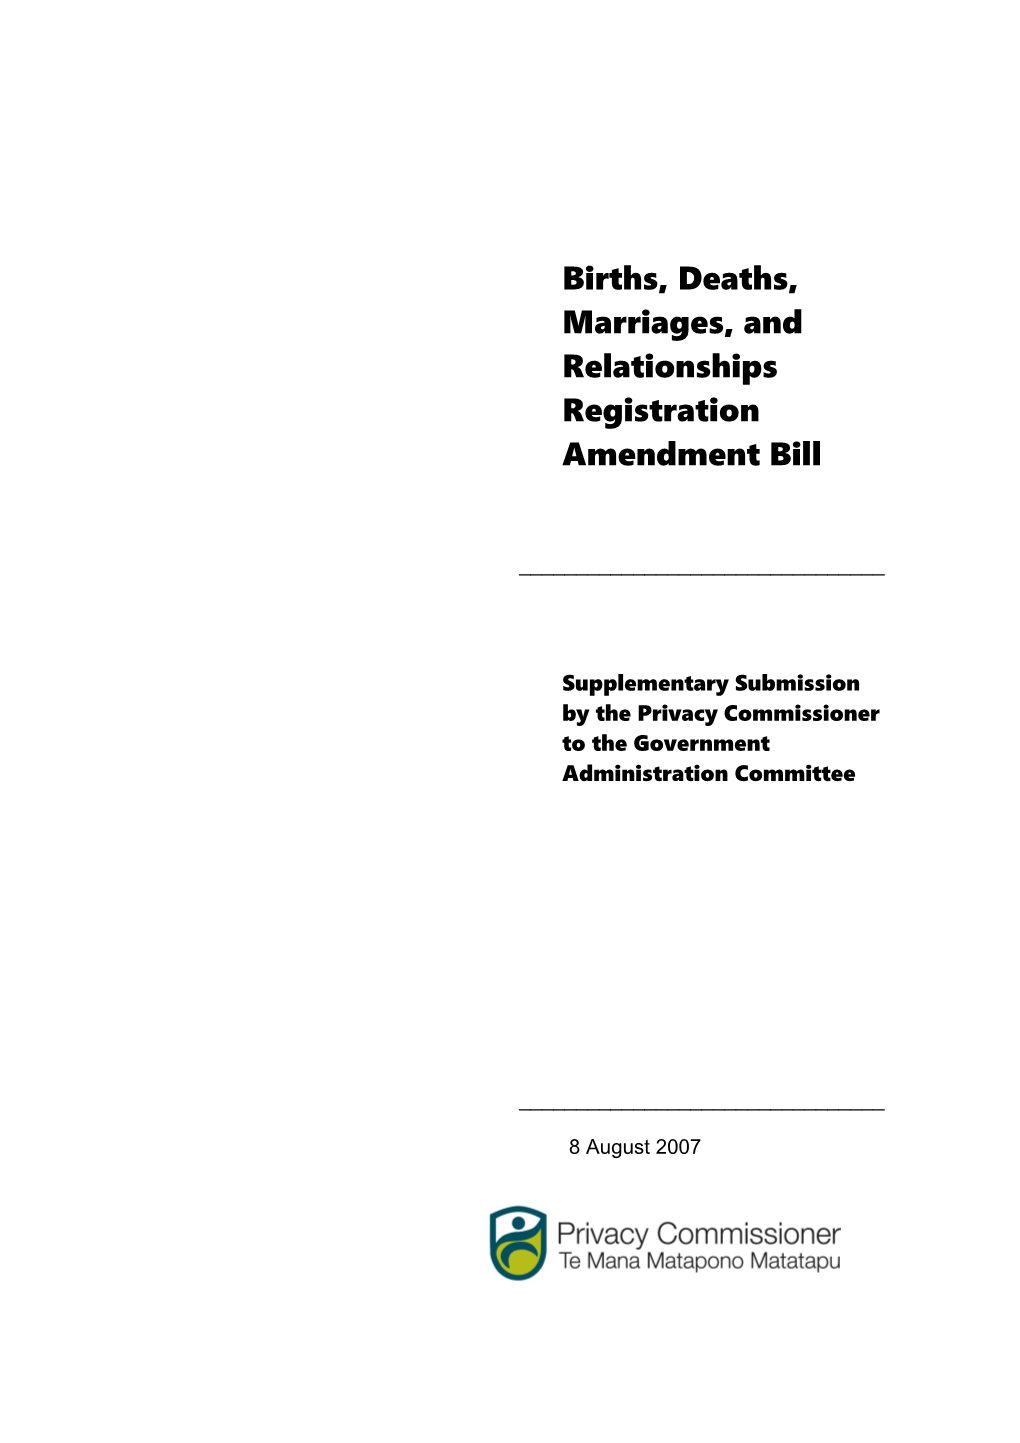 Births, Deaths, Marriages, and Relationships Registration Amendment Bill